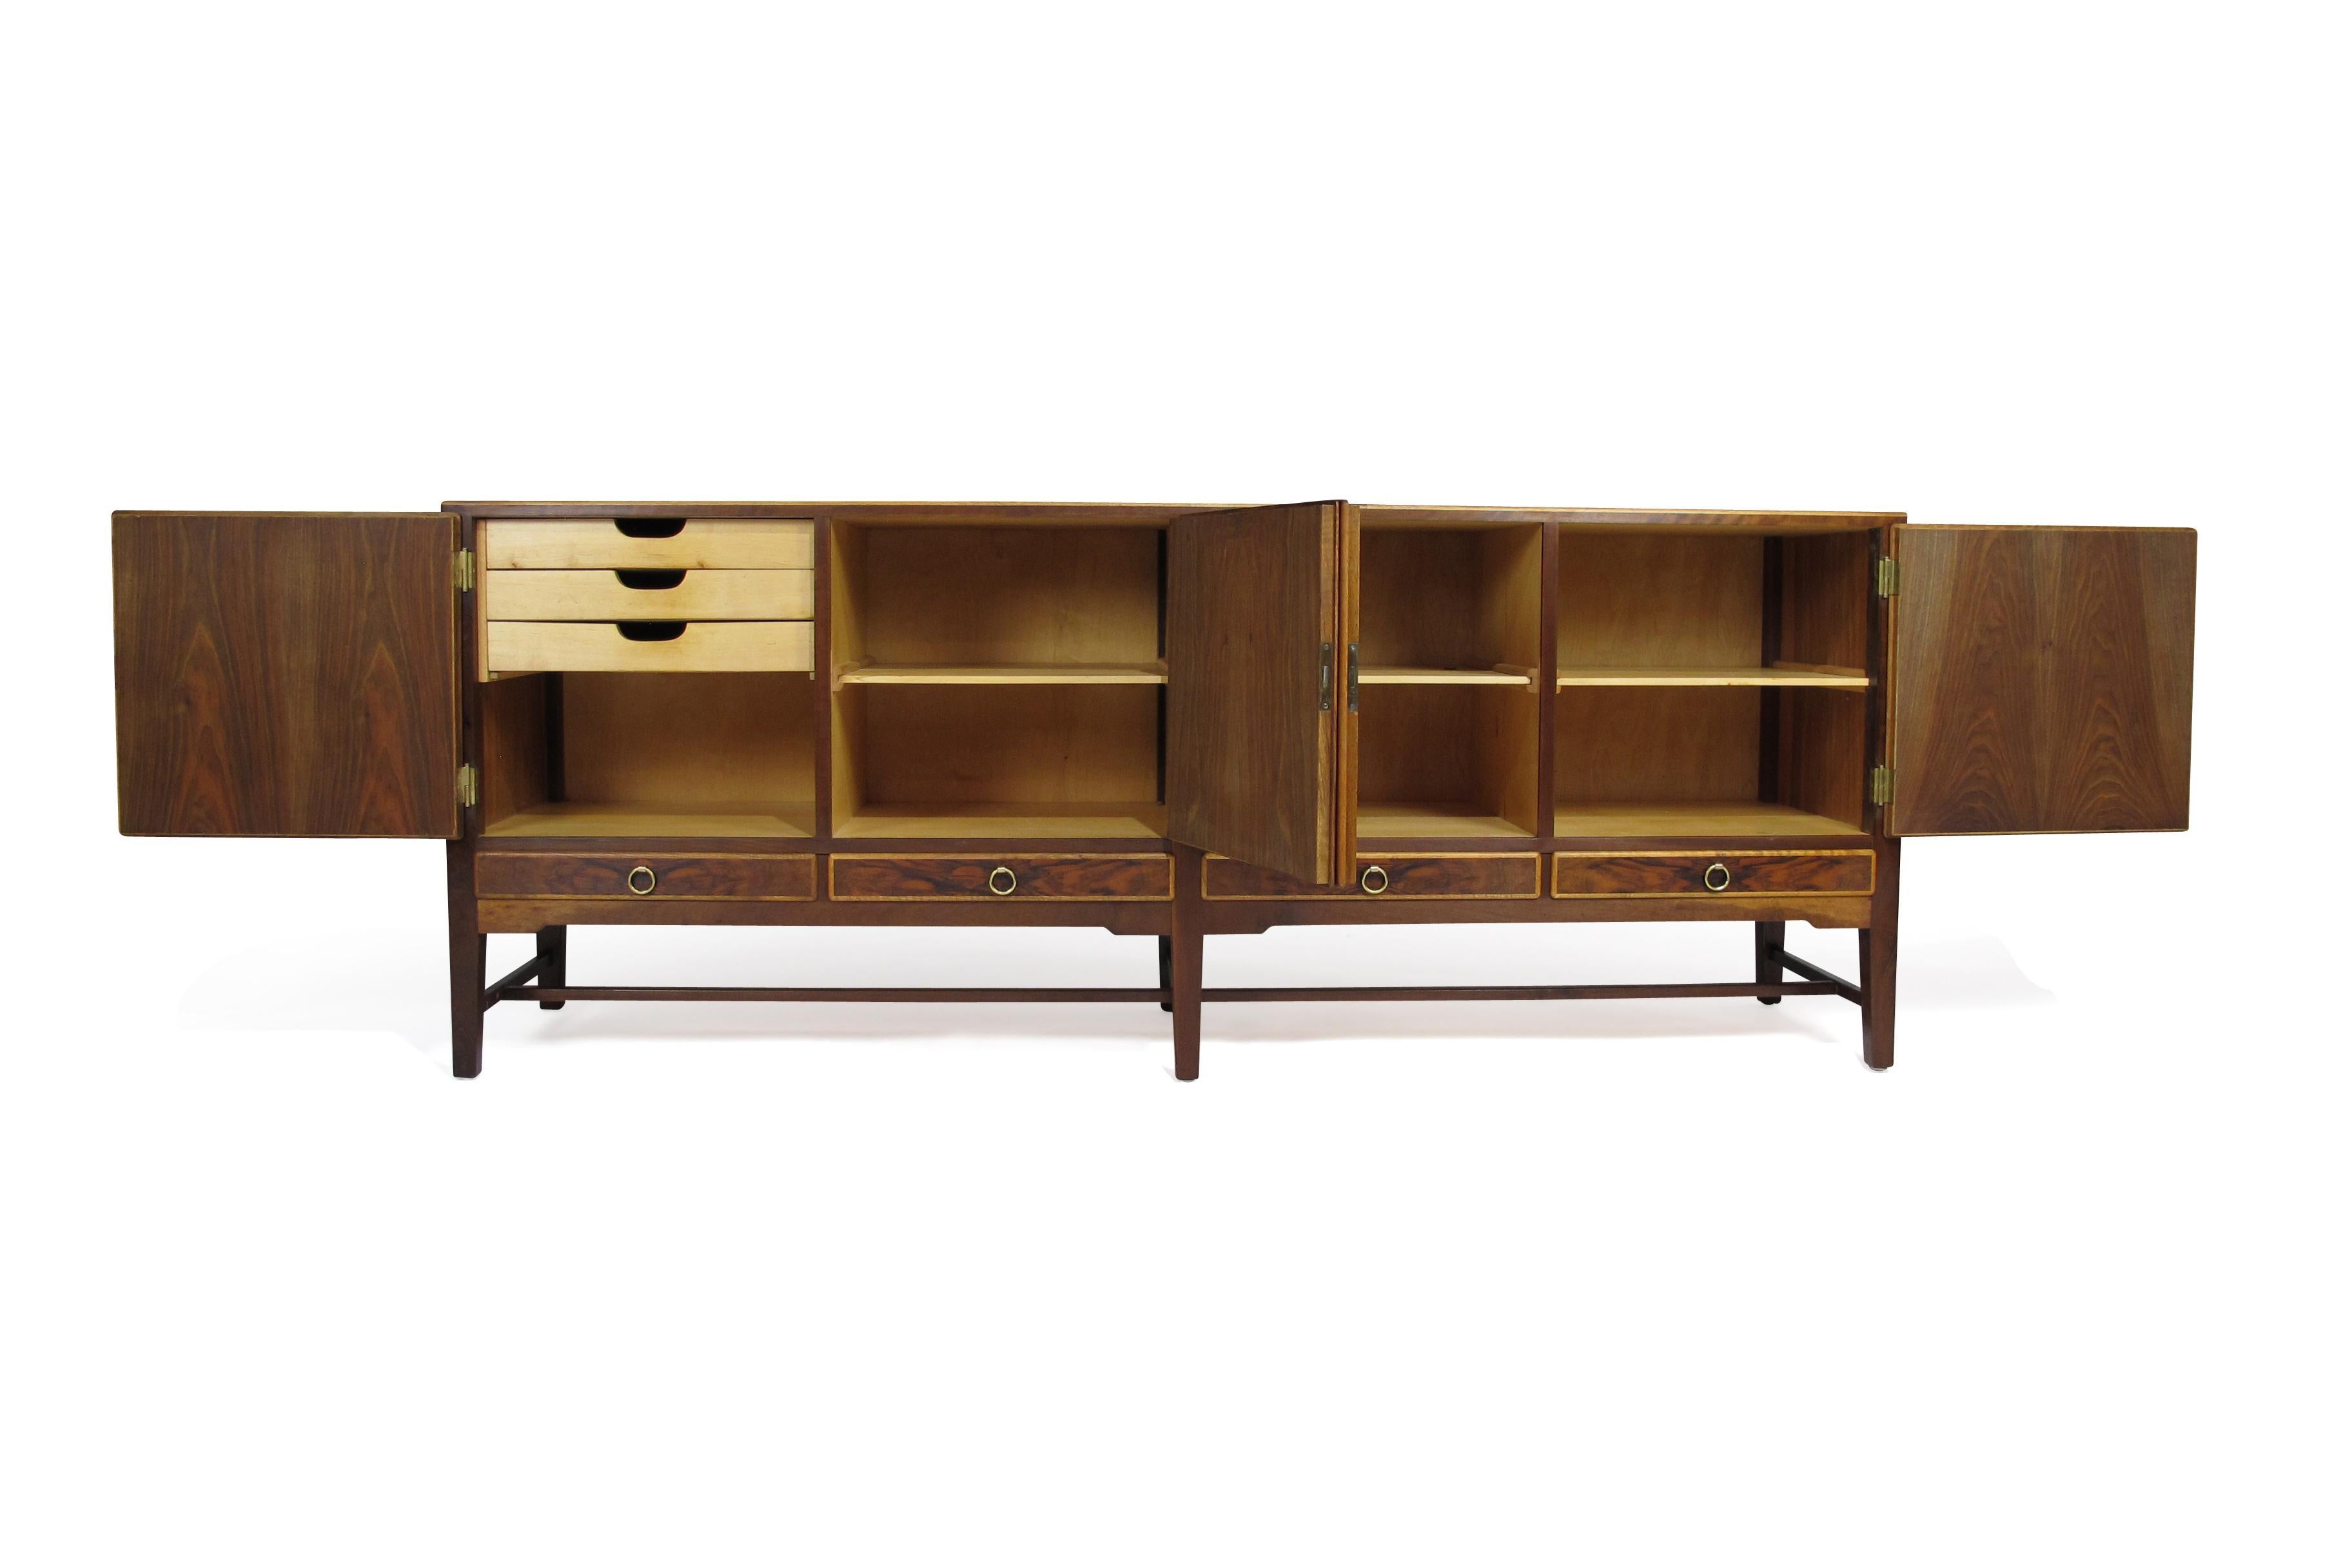 Finely crafted 1930s Scandinavian cabinet of burled walnut with figured book-matched grain, dove tail joinery and series of four locking doors above four drawers with solid brass pulls. The cabinet doors are fully locking and when opened reveal